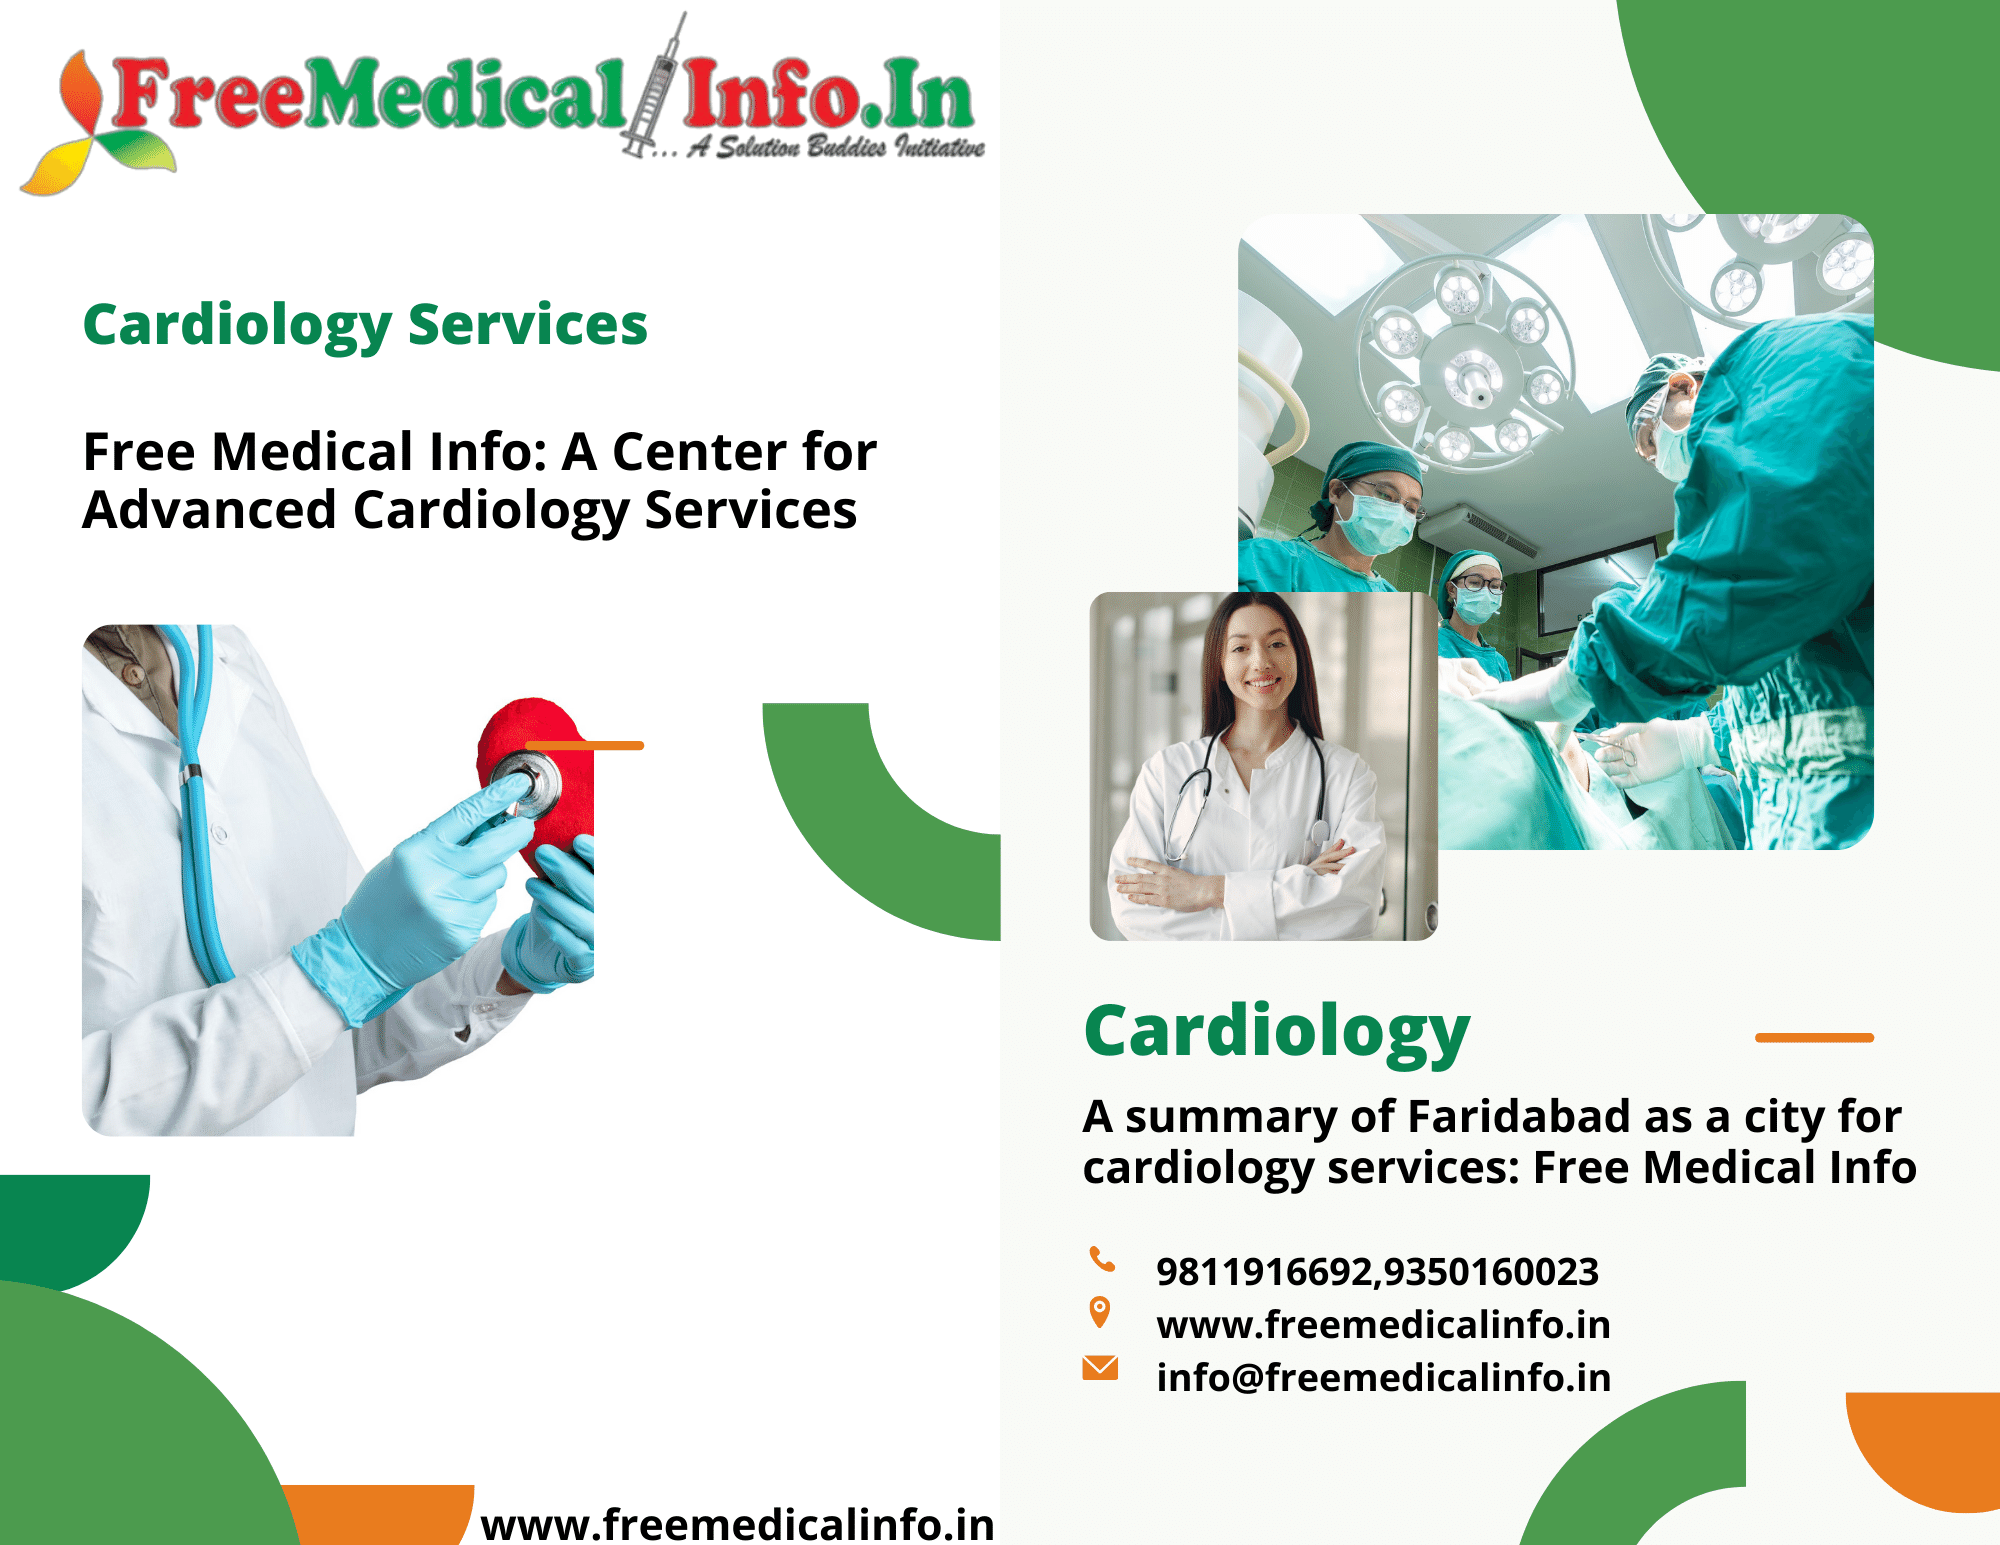 A summary of Faridabad as a city for cardiology services: Free Medical Info